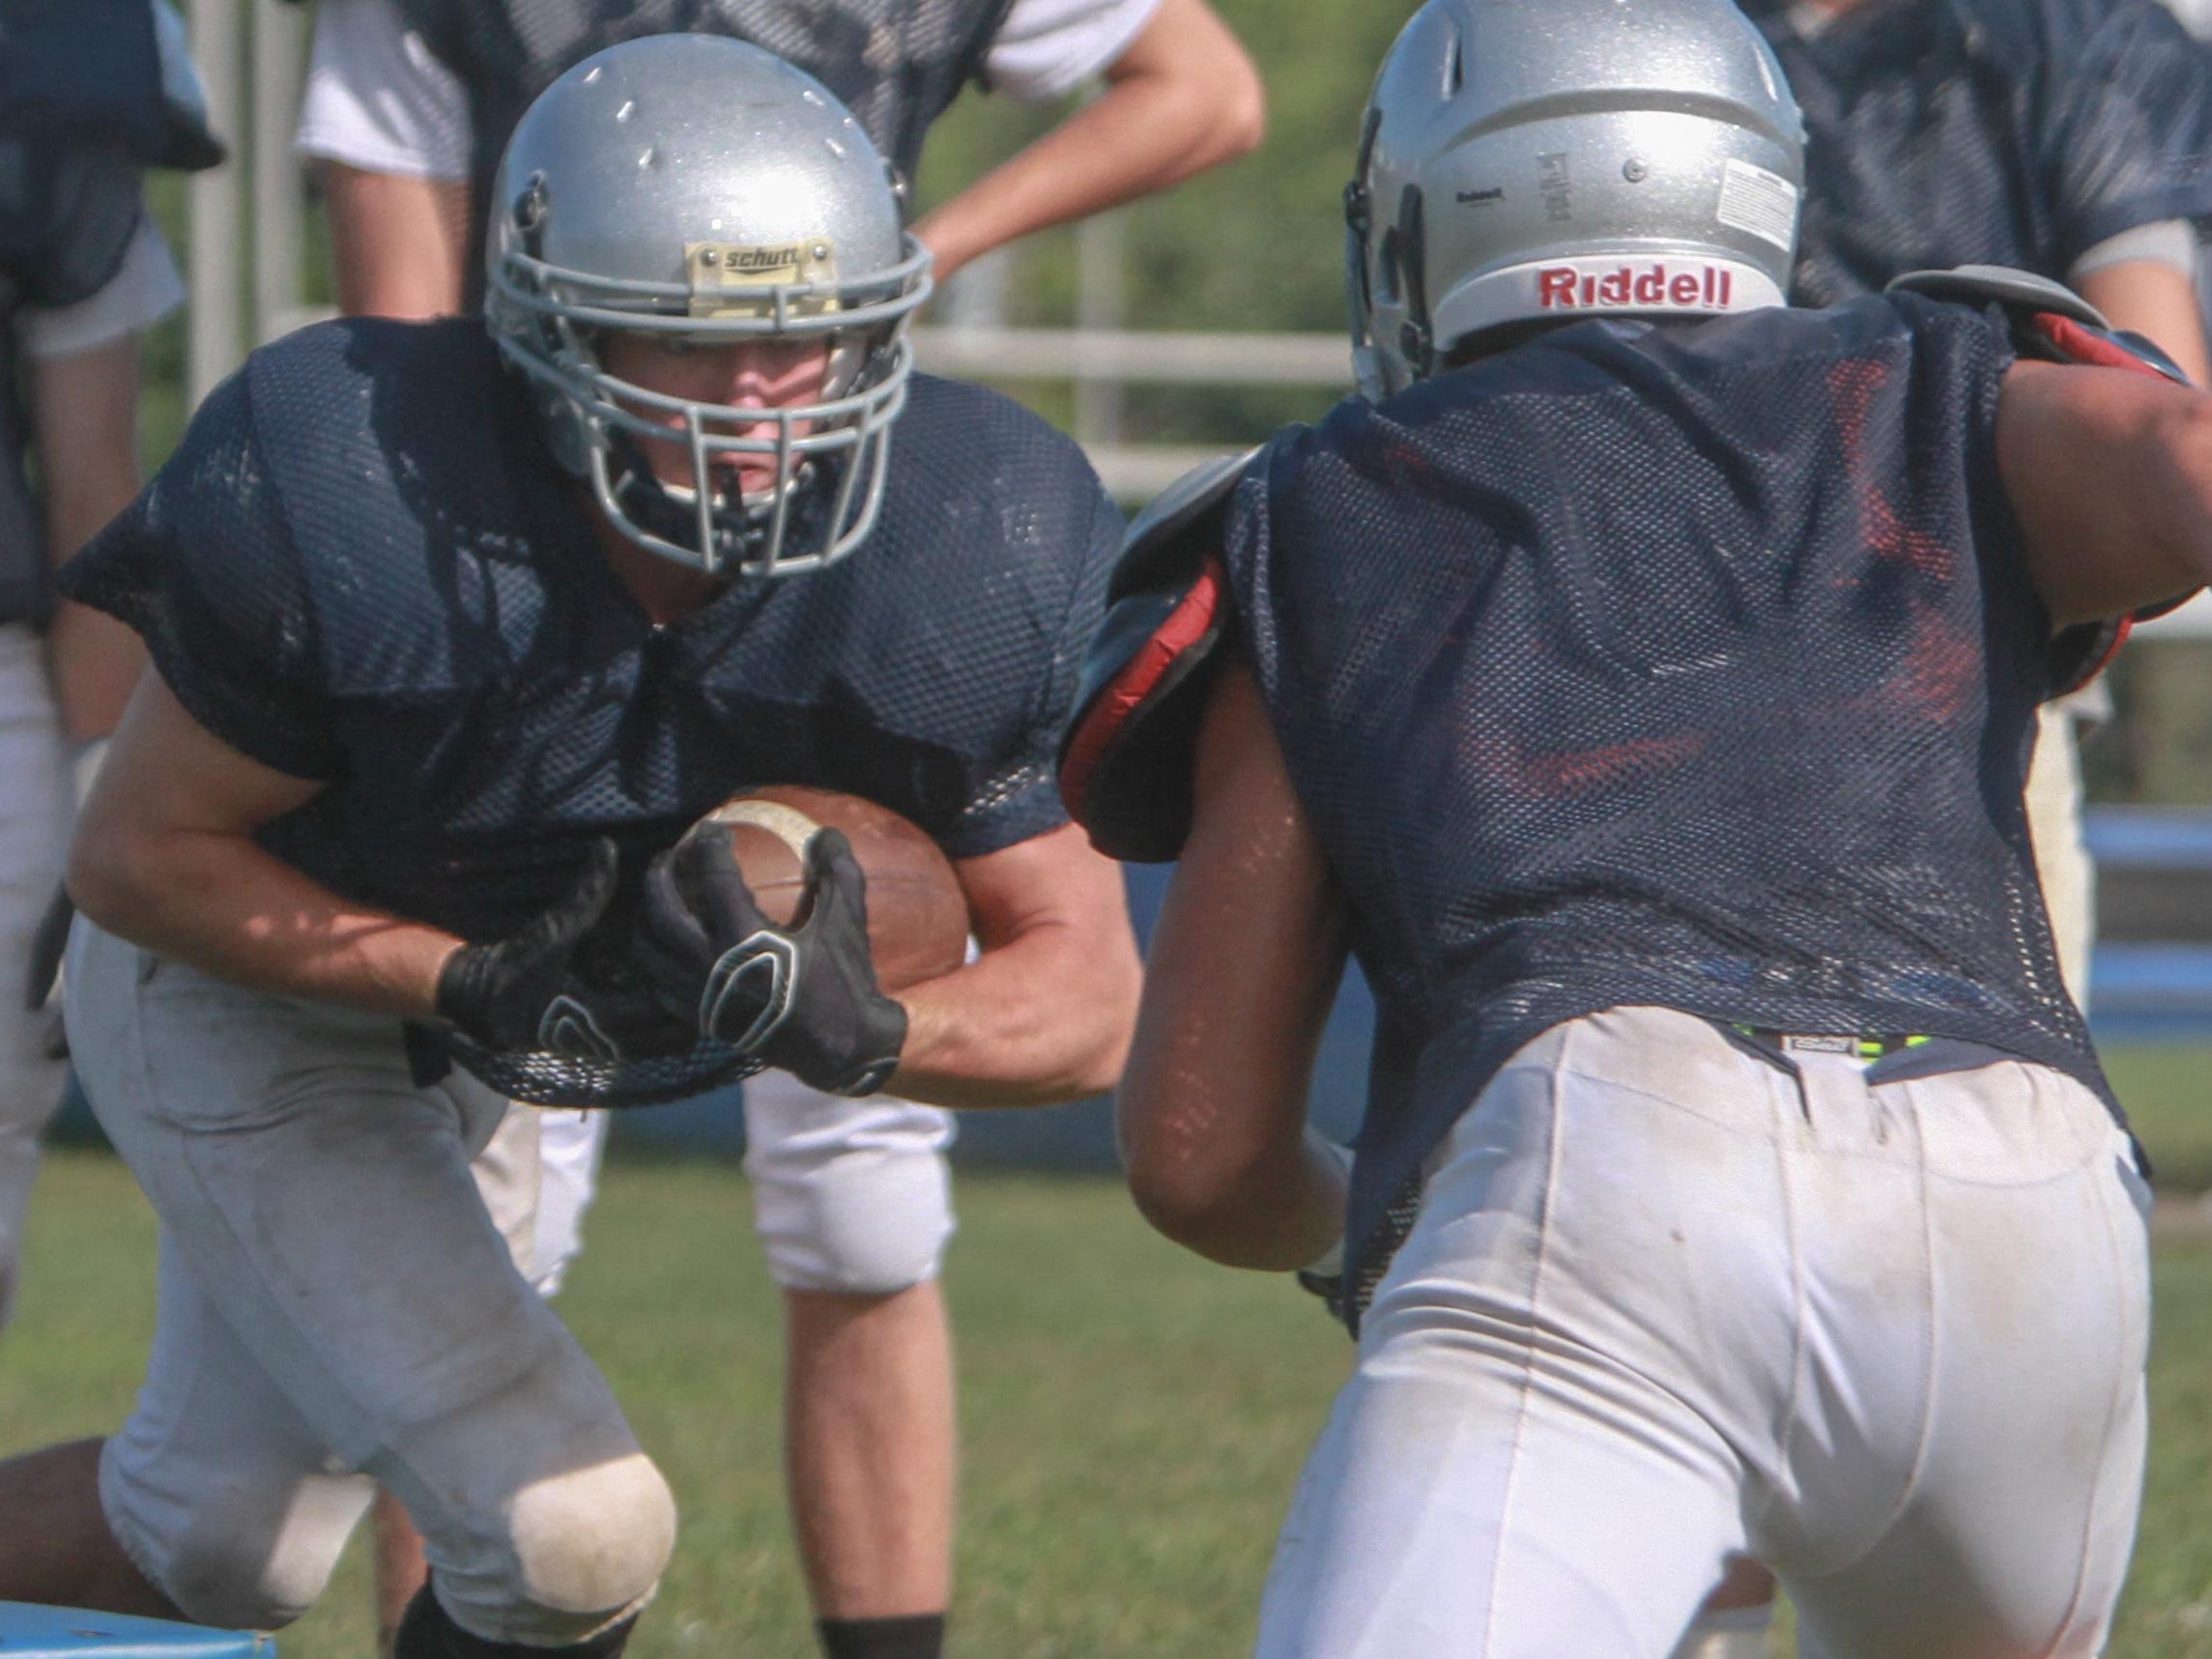 Paul Krueger takes the handoff for Manasquan during practice this summer.